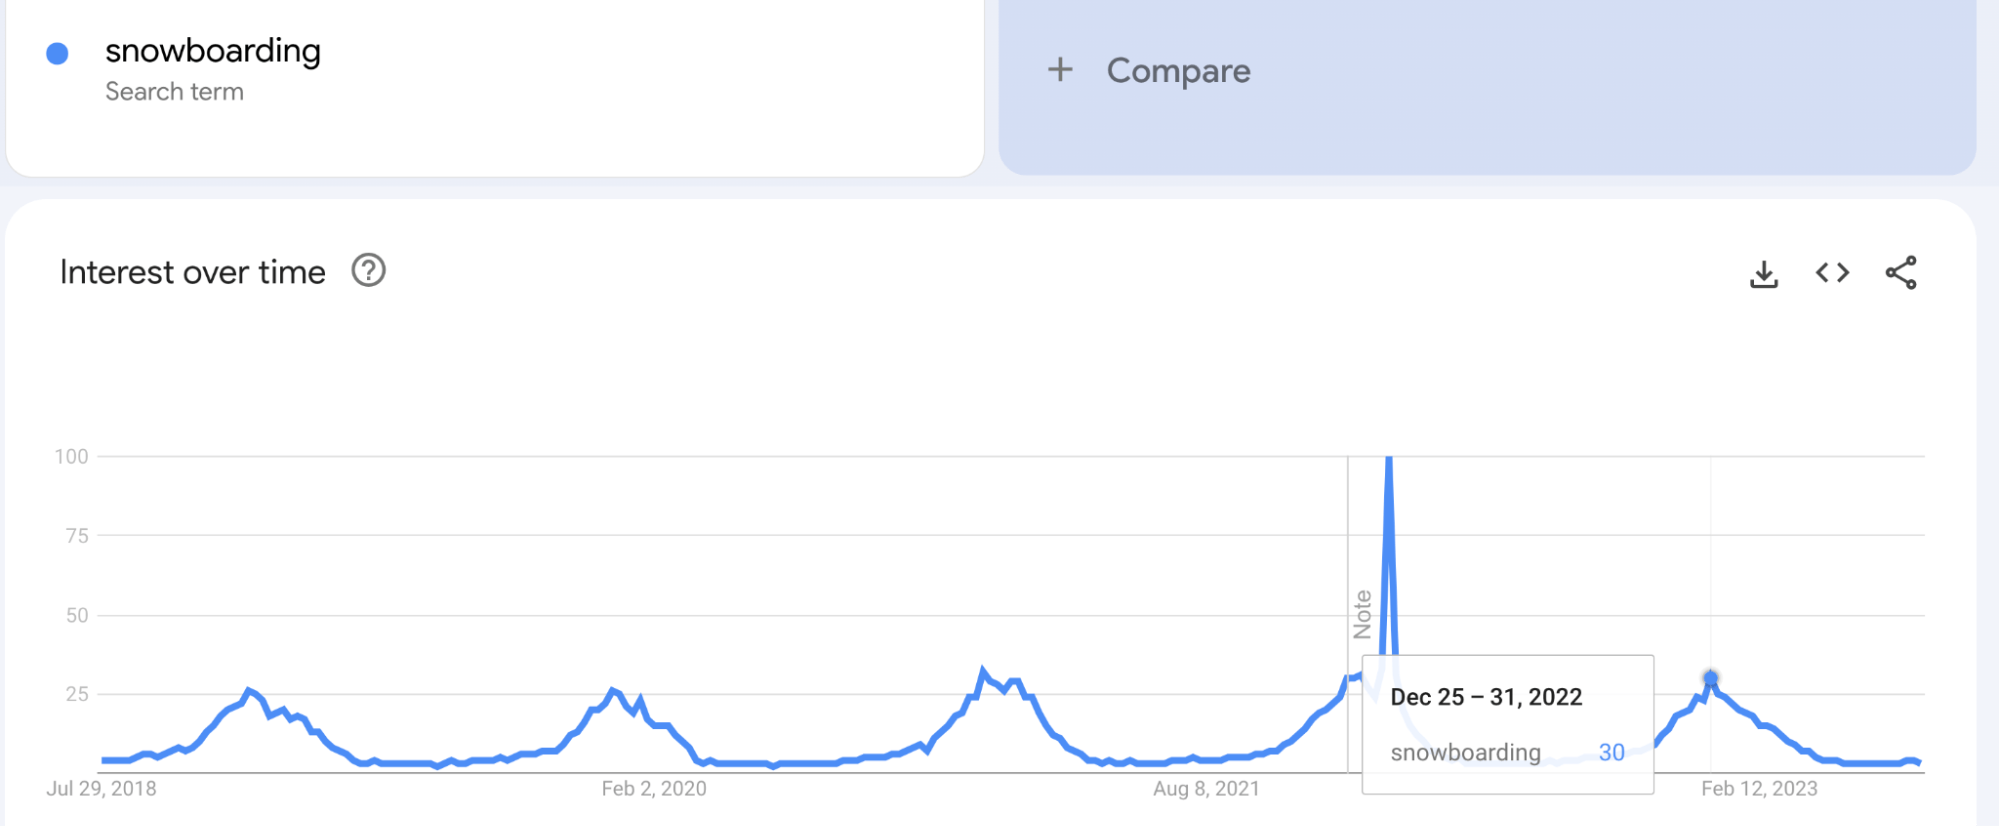 Google Trends results for "snowboarding"